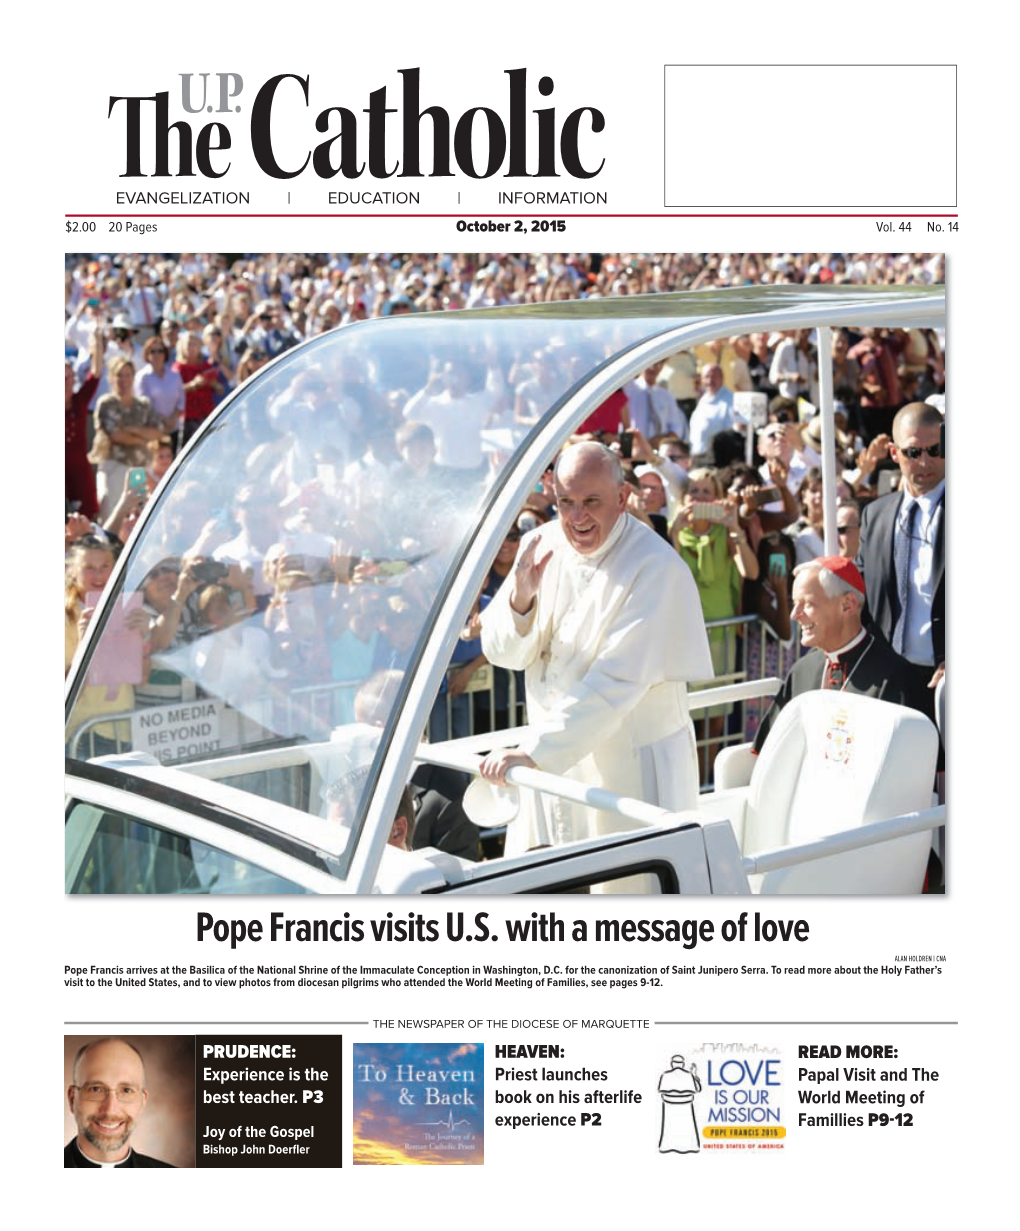 Pope Francis Visits U.S. with a Message of Love